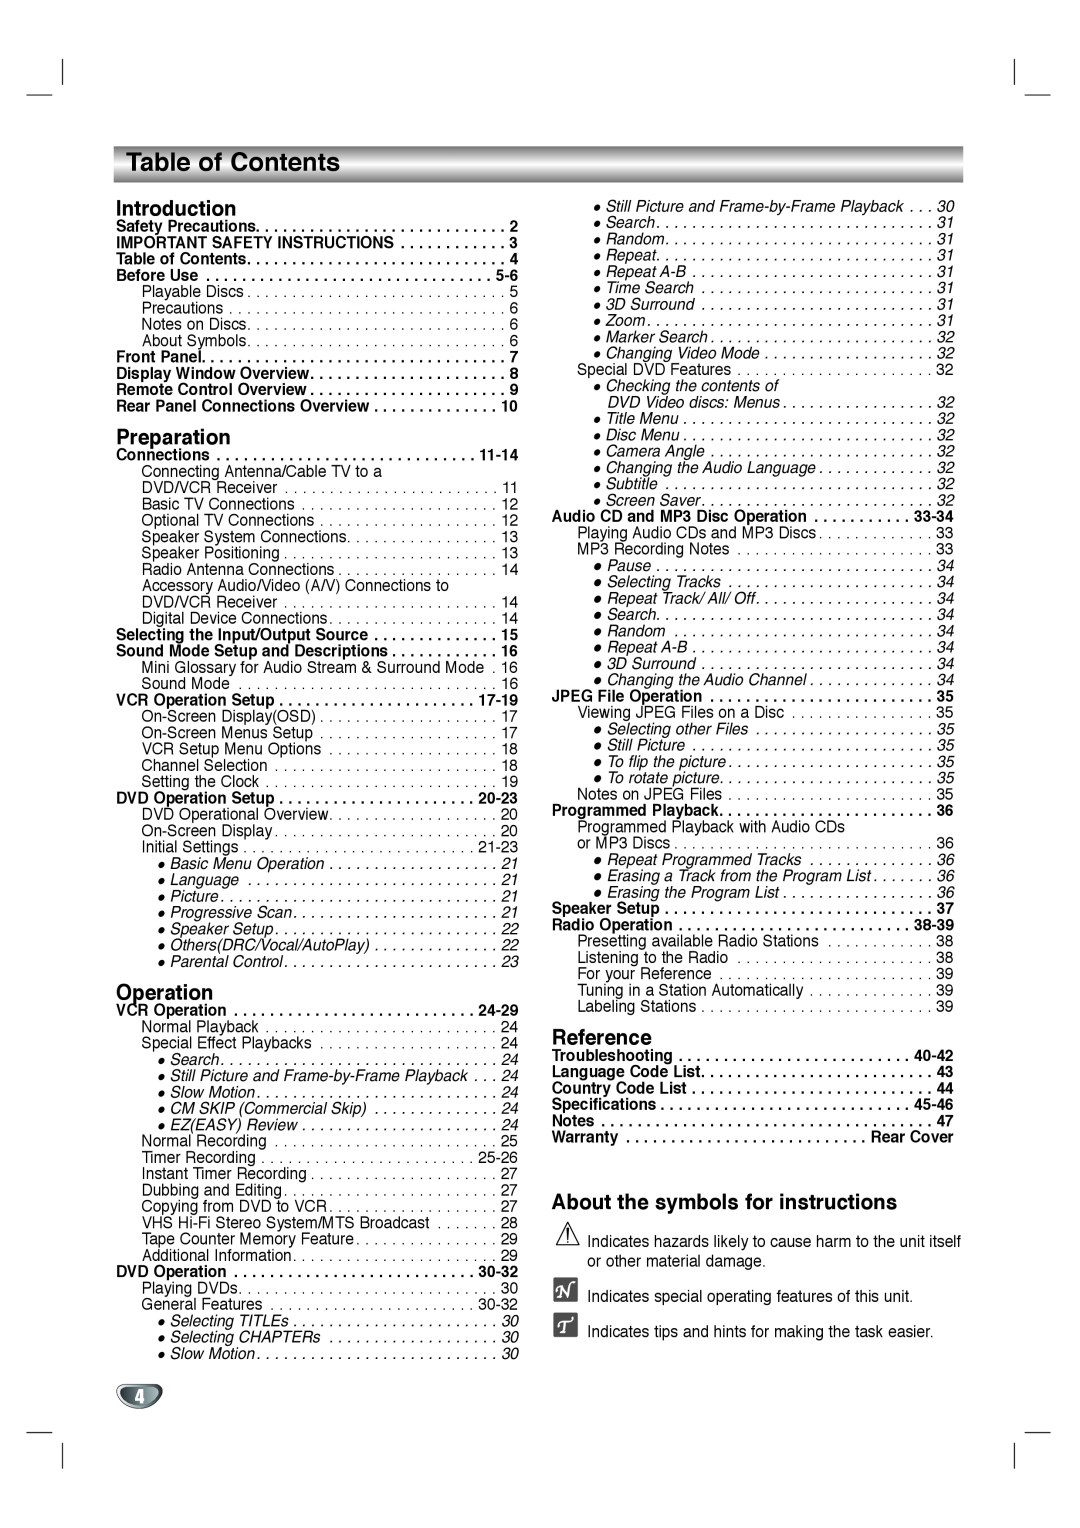 Zenith XBS344 Table of Contents, Introduction, Preparation, Operation, Reference, About the symbols for instructions 